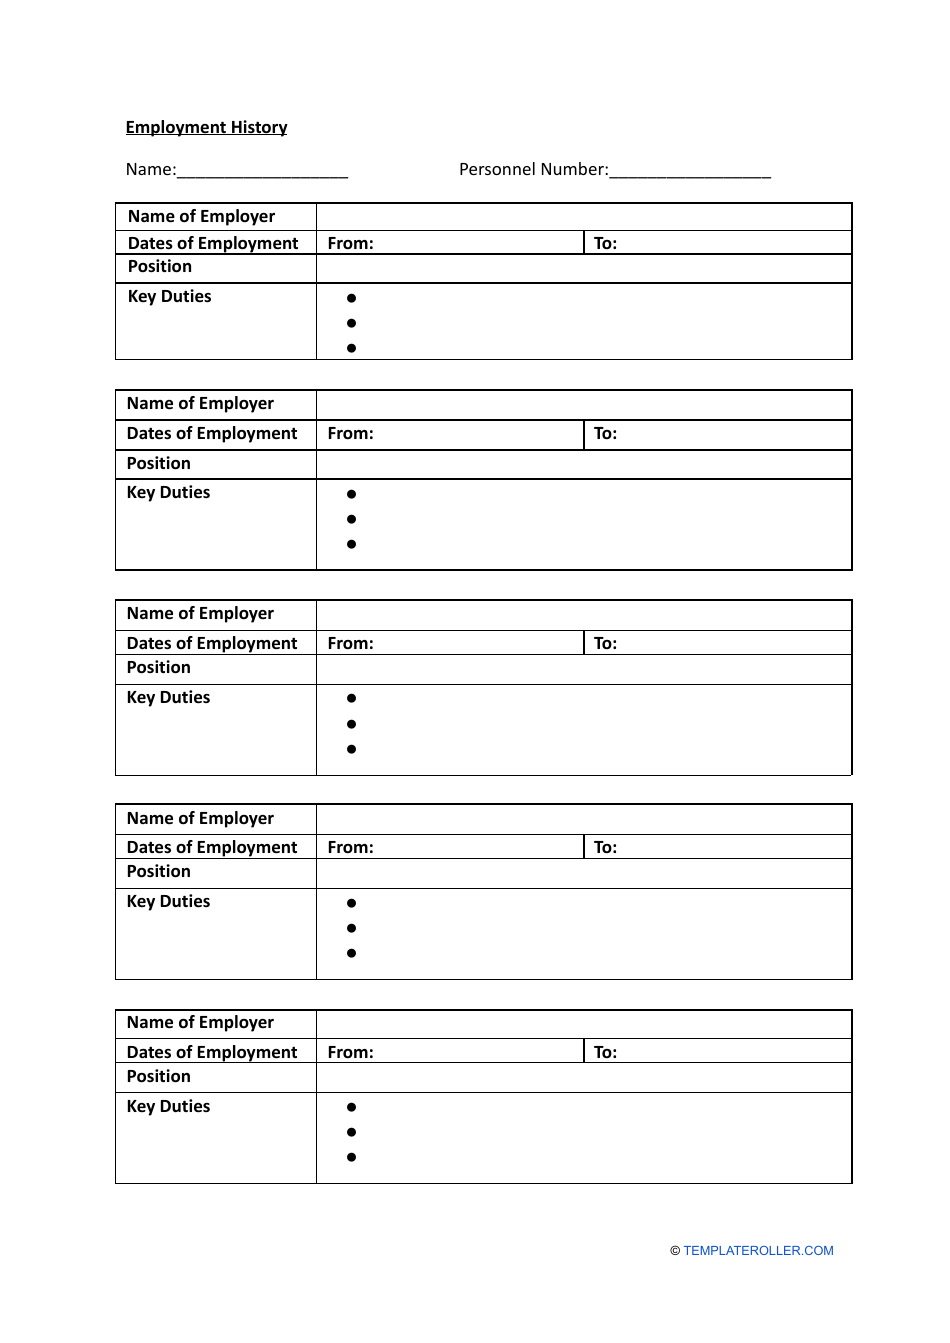 Employment History Template - Fillable and Printable